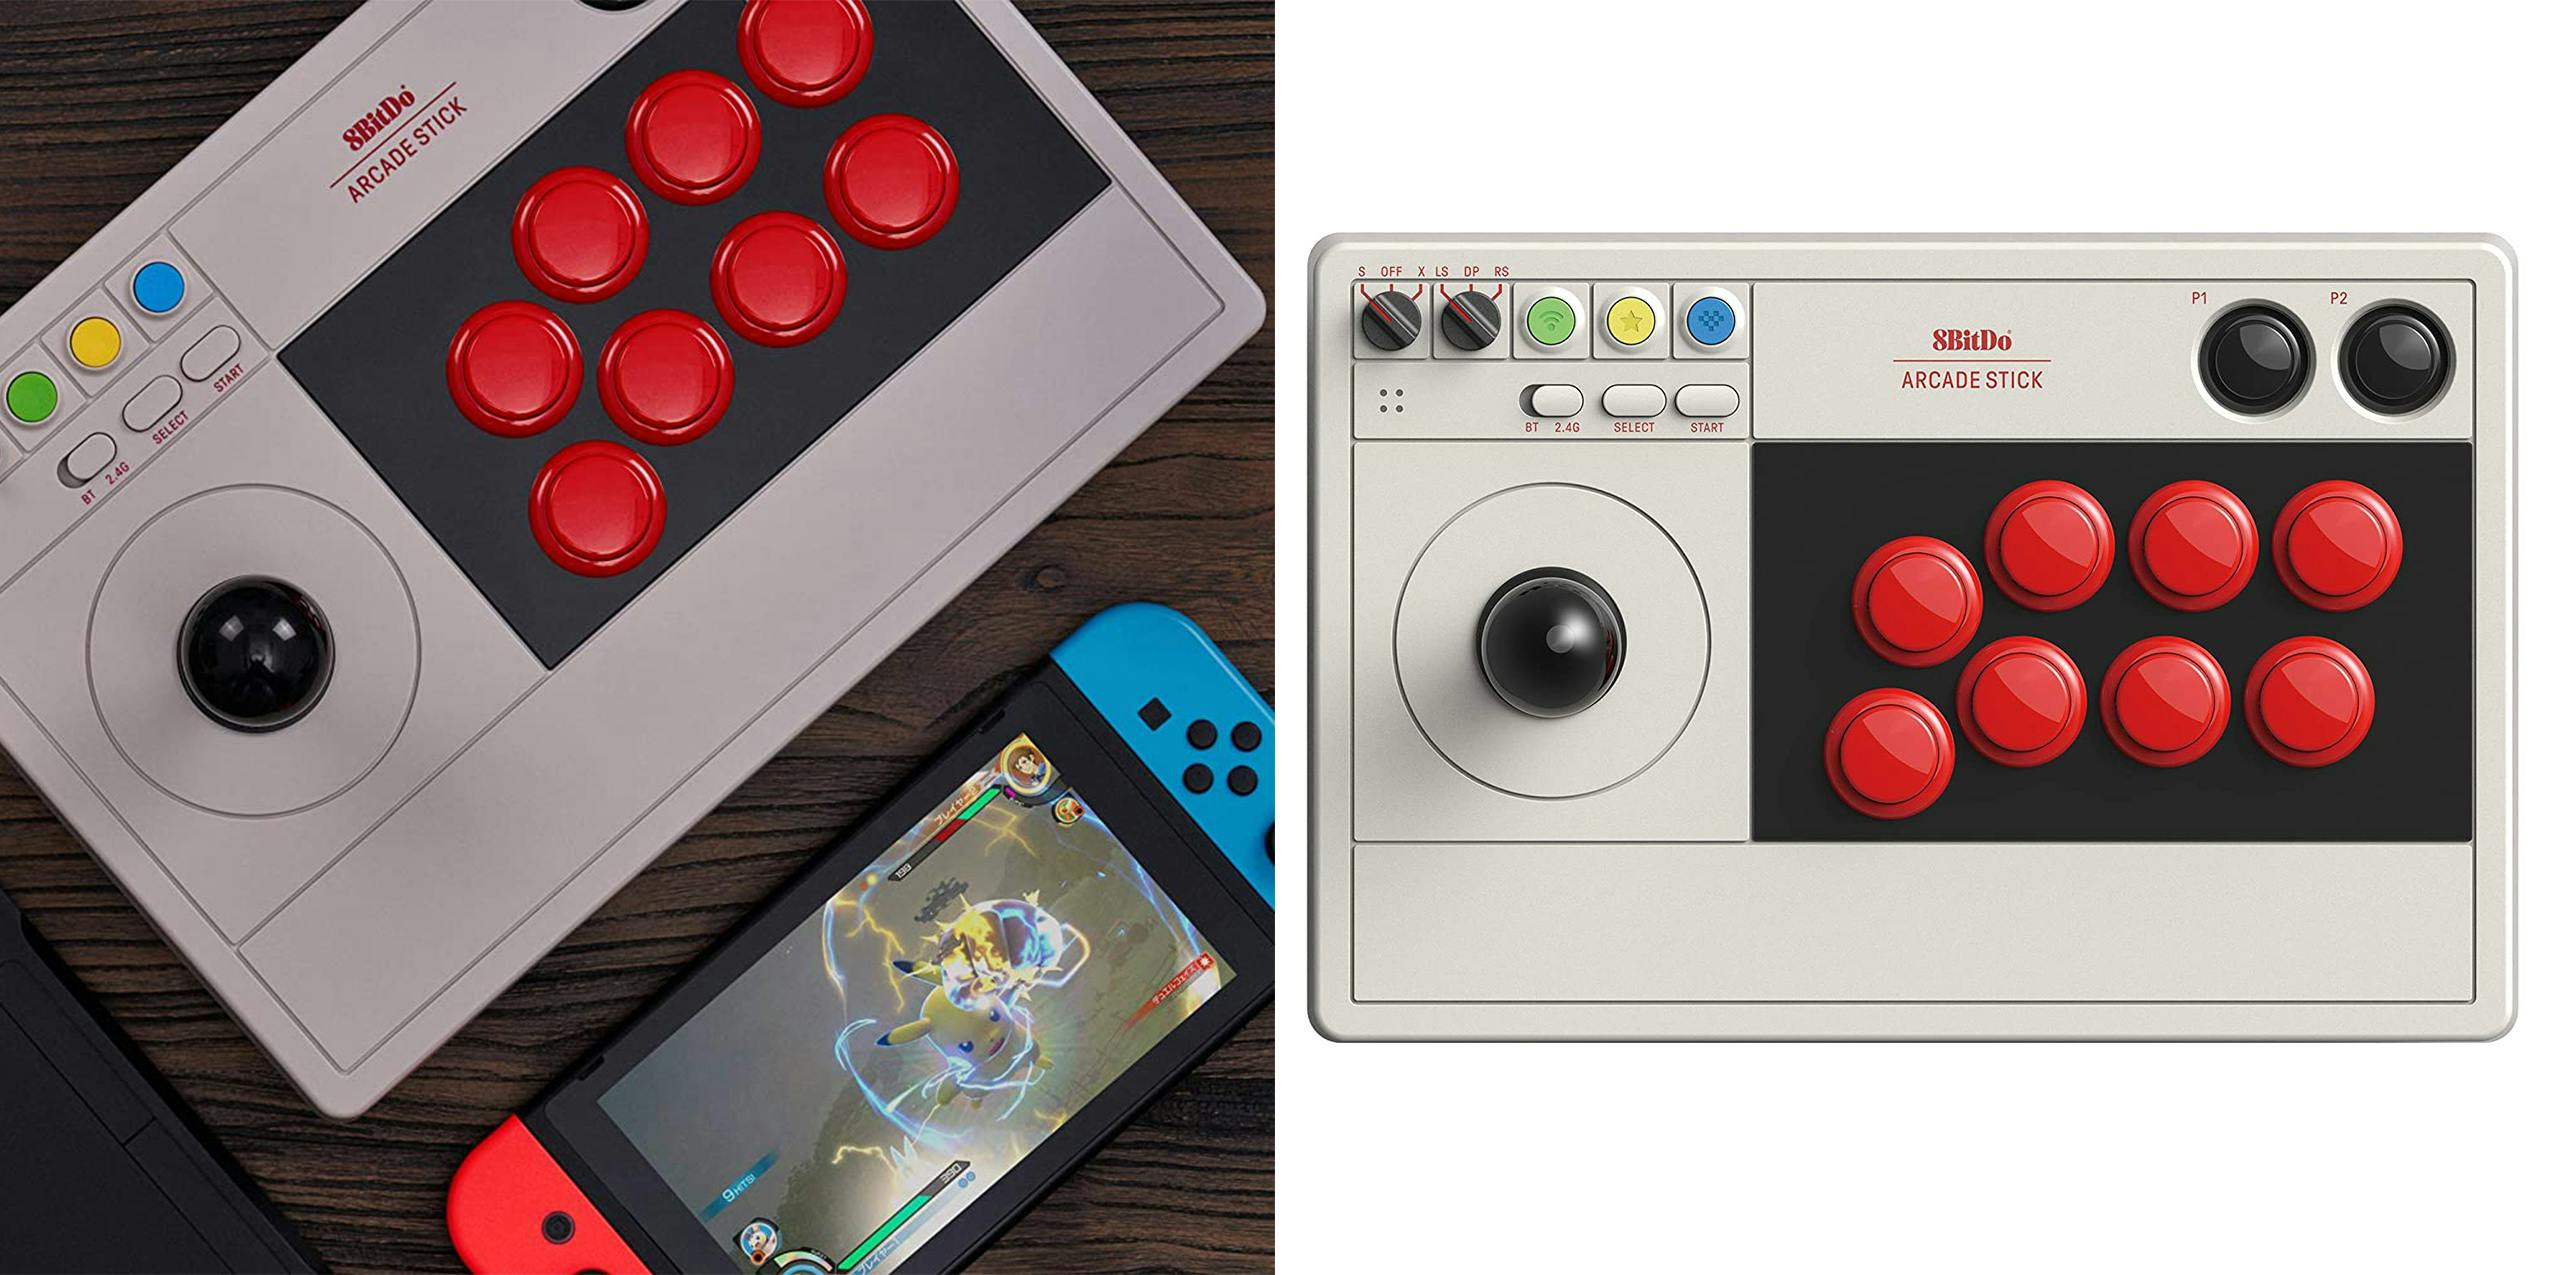 An 8BitDo Arcade Stick for Nintendo Switch on a wooden table along with a Switch console.